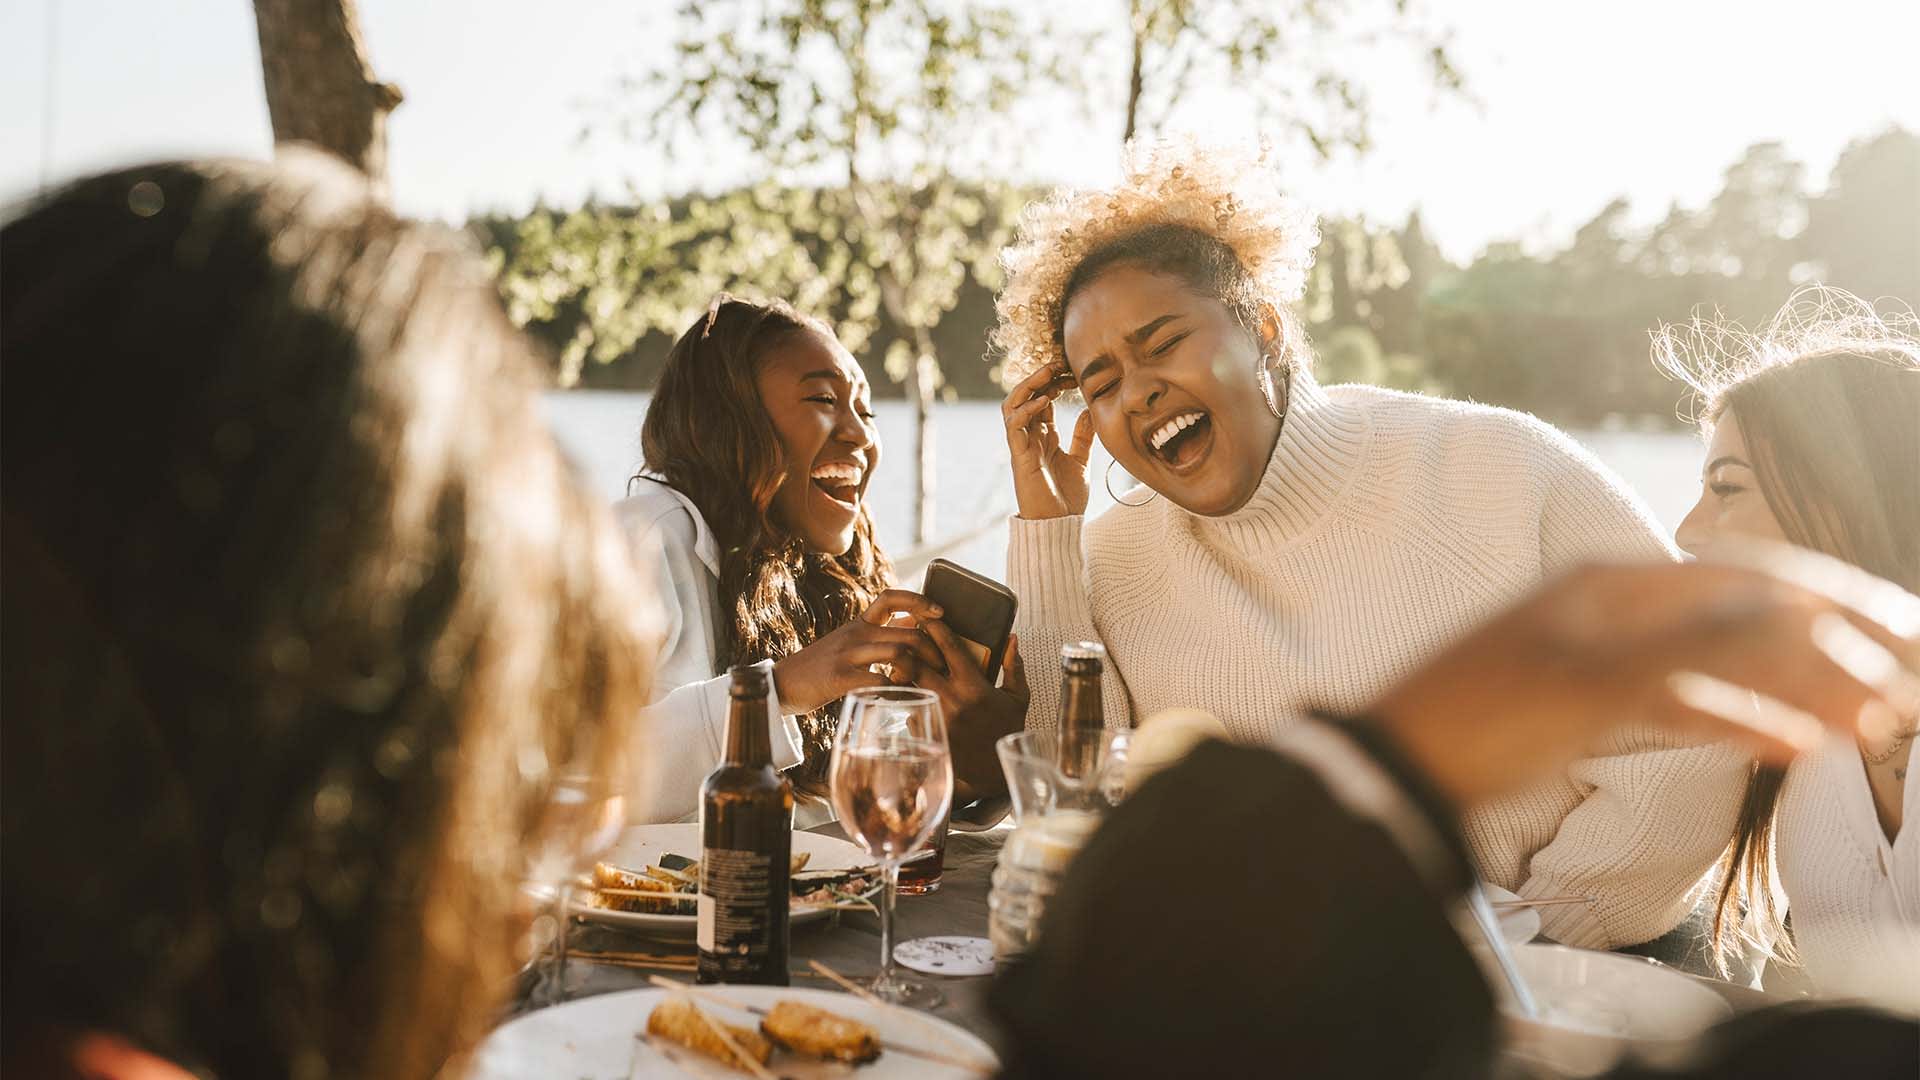 3 Essential Ingredients of Enduring Friendships, According to a Writer Who Interviewed 100 Sets of Friends